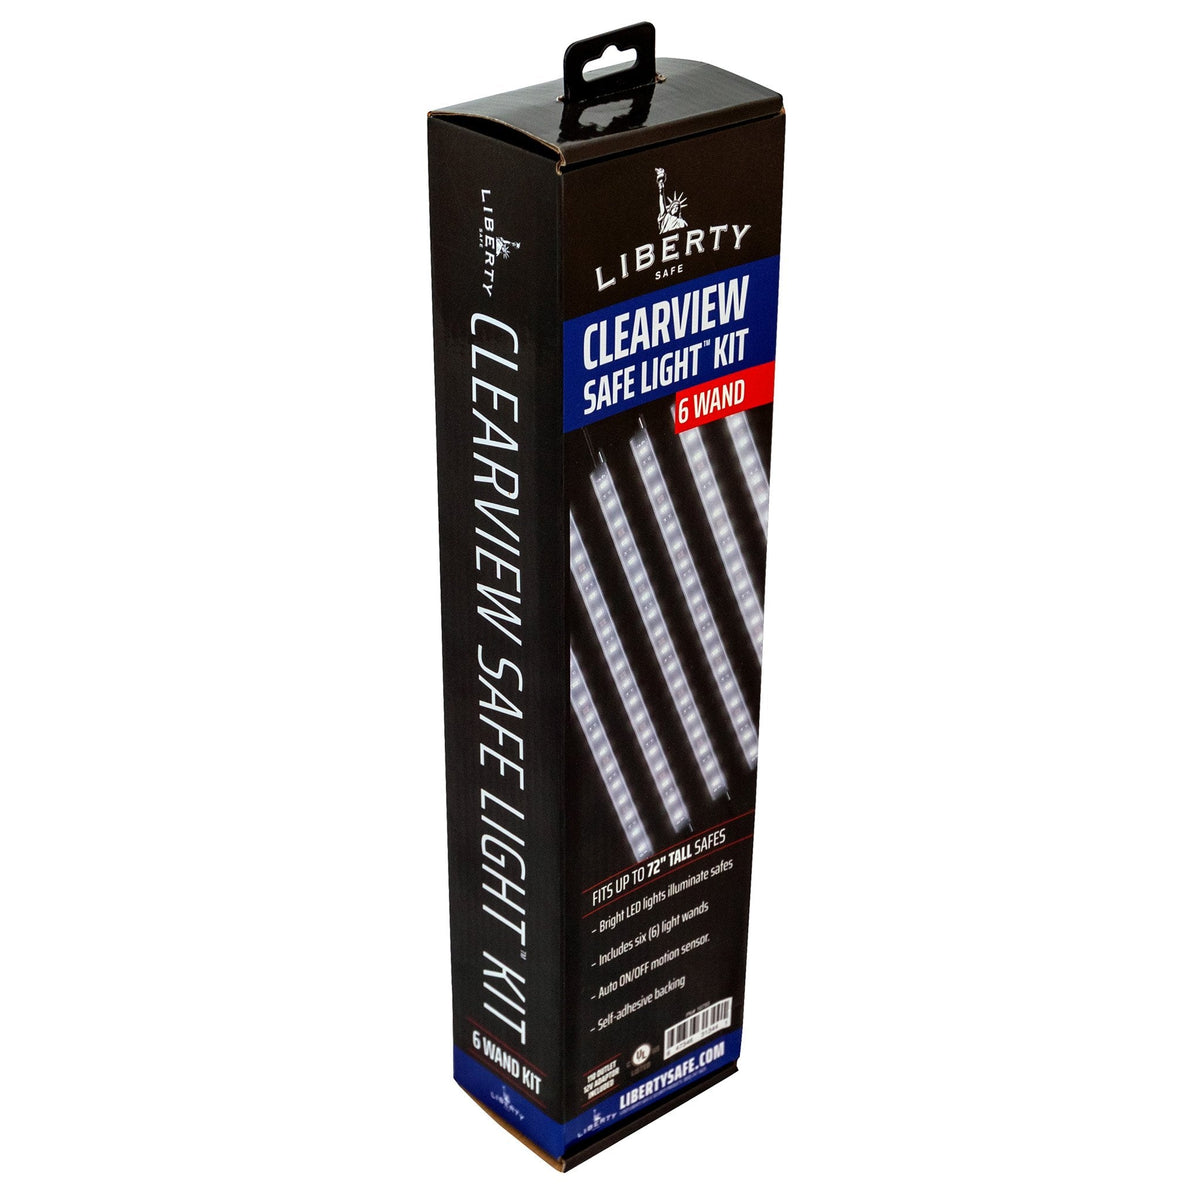 Liberty Safe Clearview Light Kit, angle view of box.